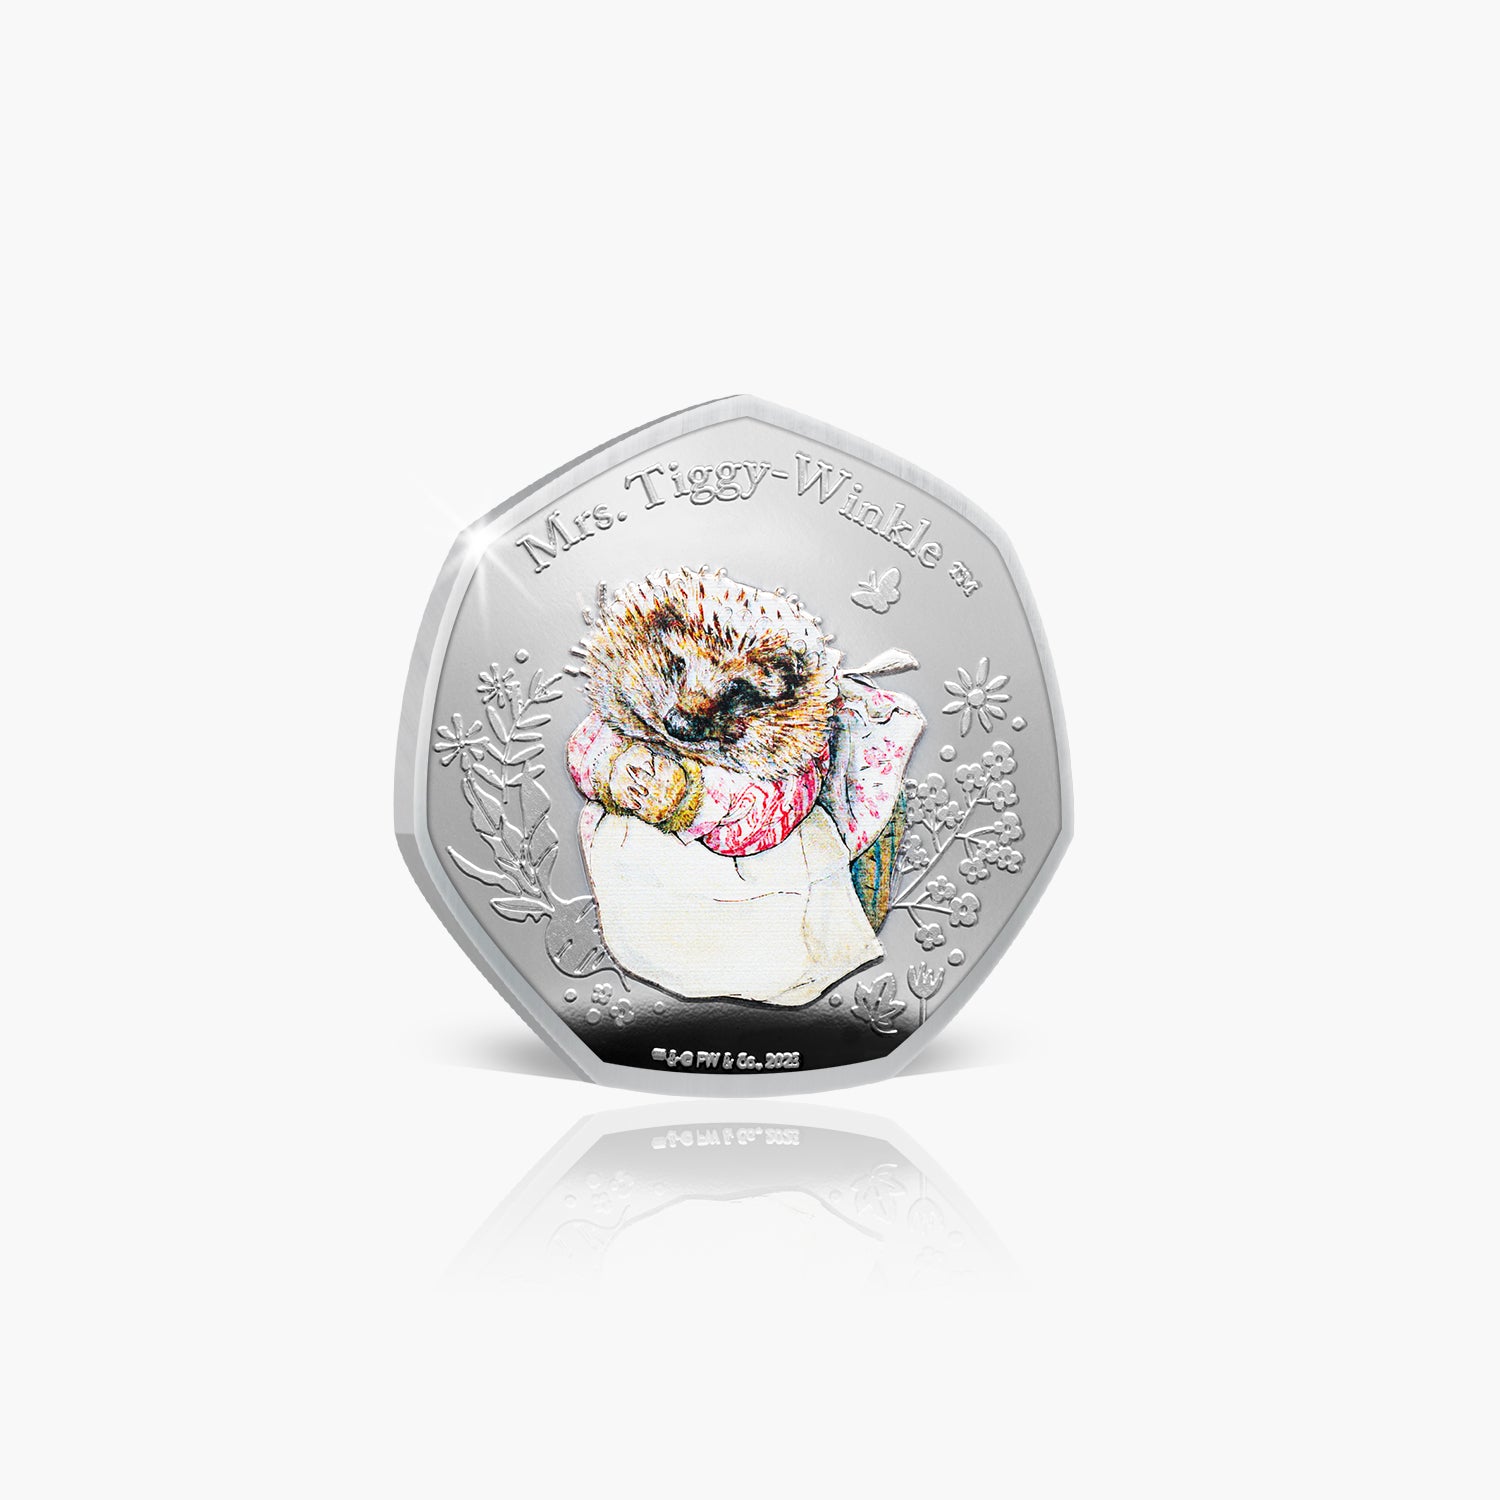 The World of Peter Rabbit 2023 Coin Collection - Mrs Tiggy -Winkle Coin